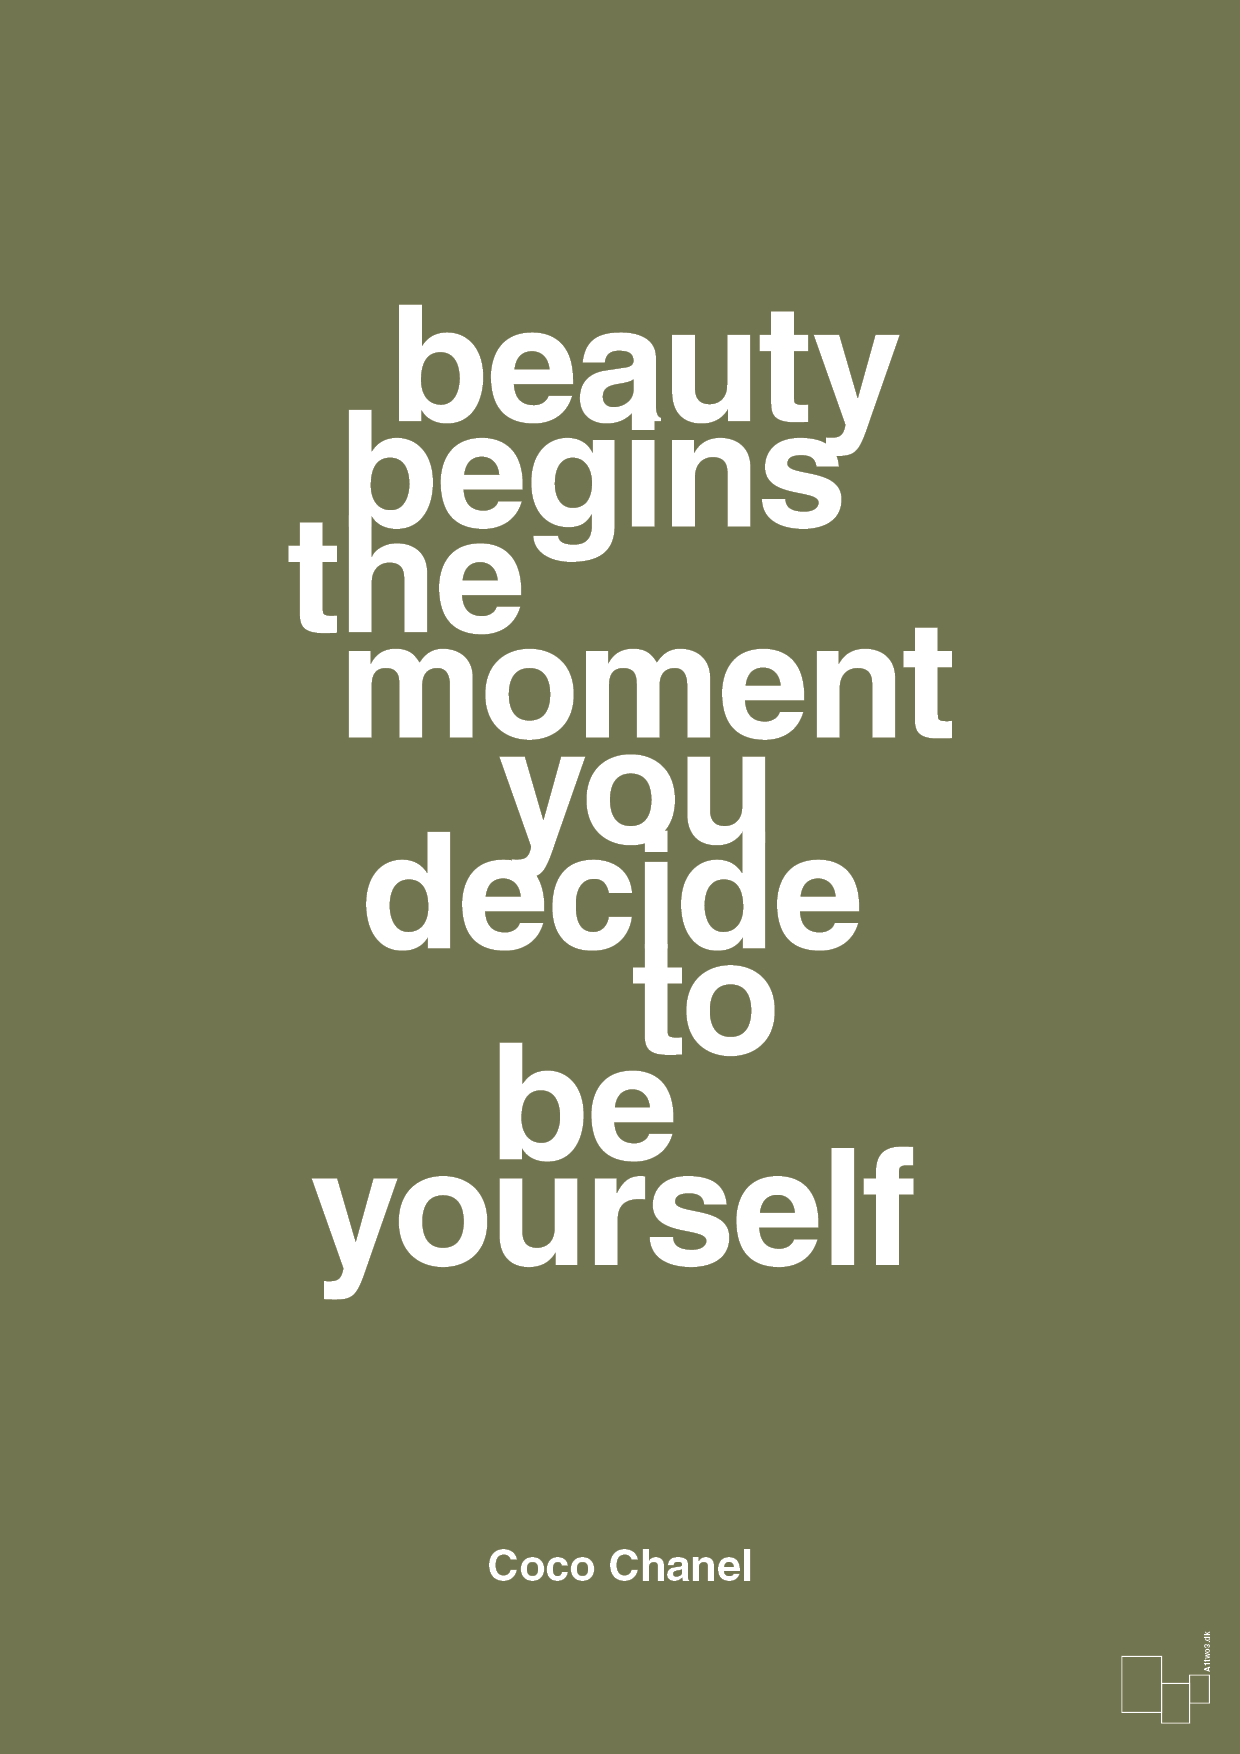 beauty begins the moment you decide to be yourself - Plakat med Citater i Secret Meadow